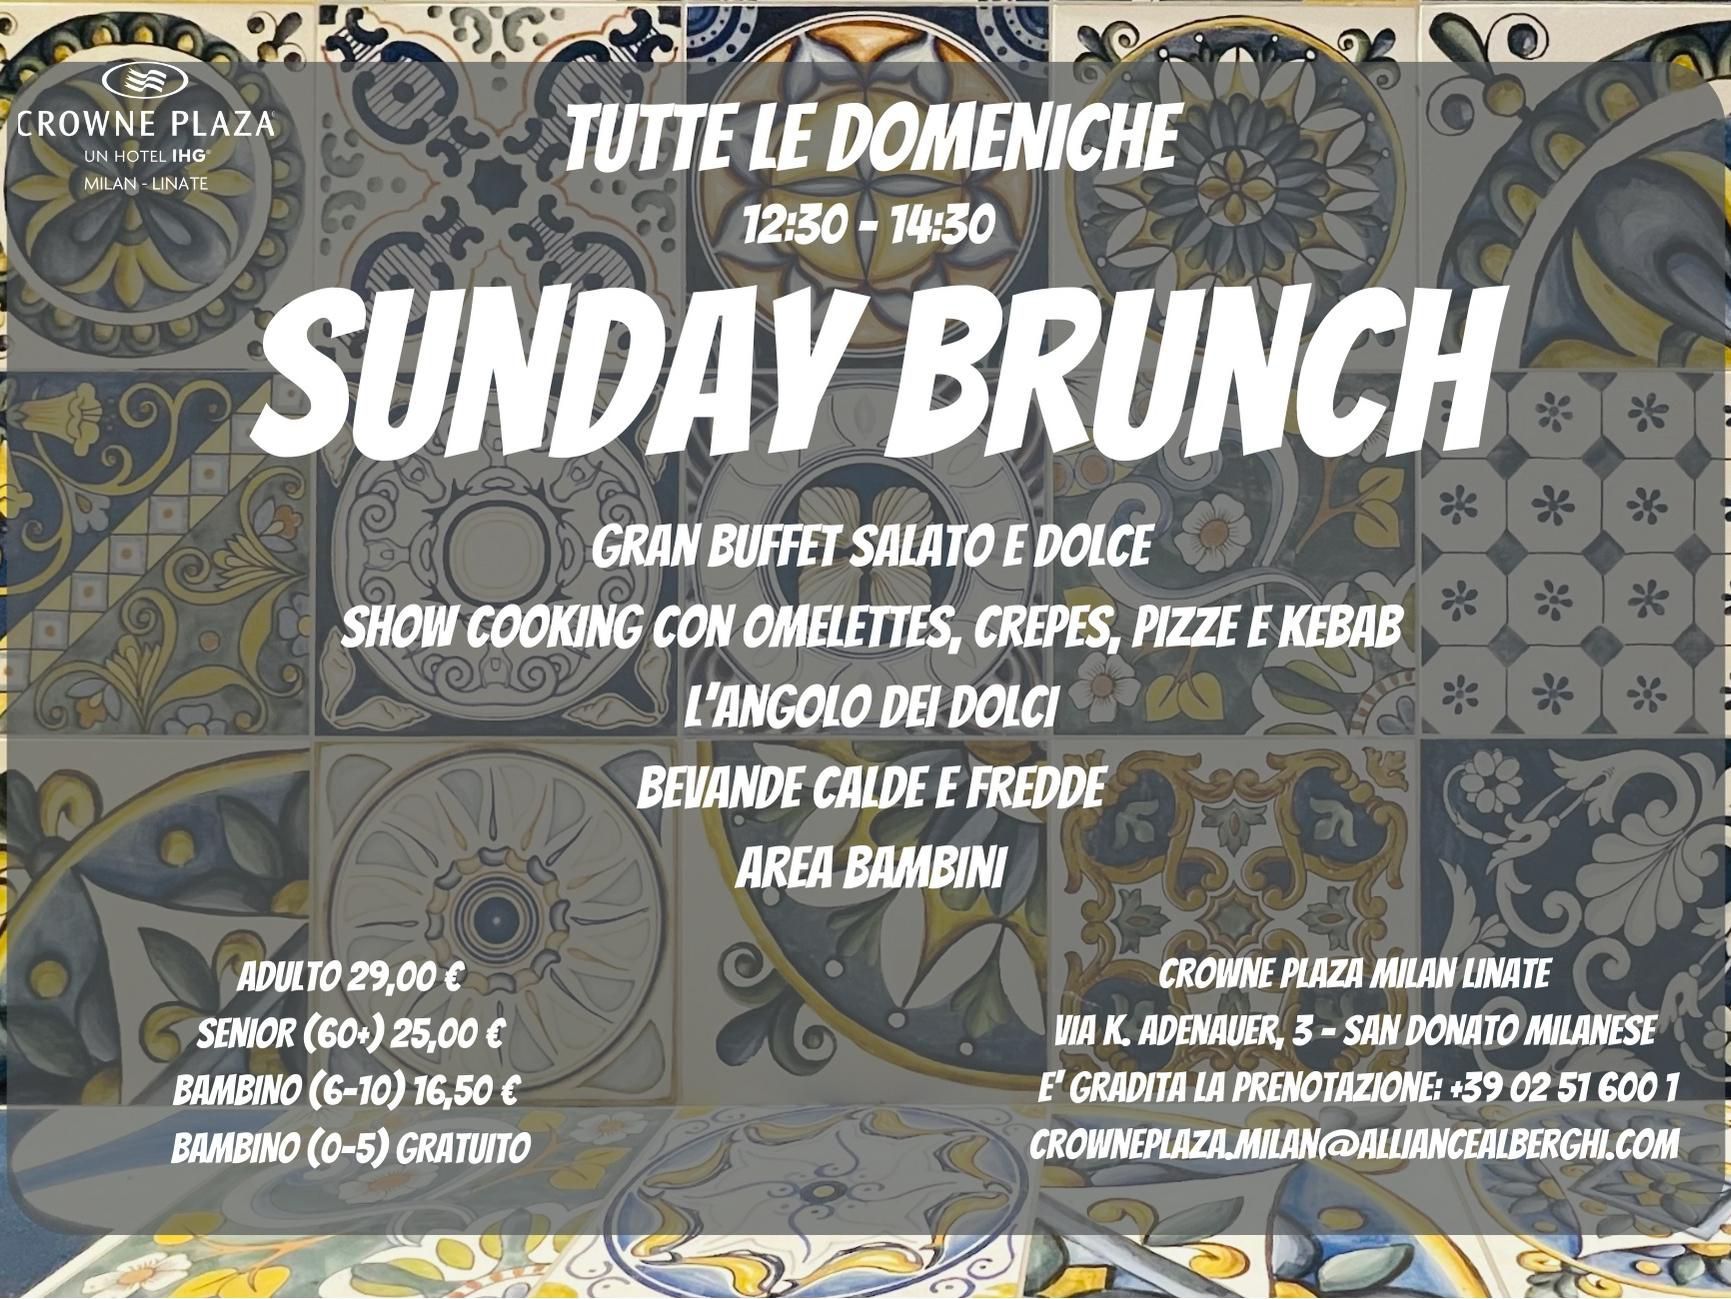 Sunday Brunch is back since 5th February, every week from 12:30 to 14:30, with a delicious choice of Italian and international dishes. Kids corner available.